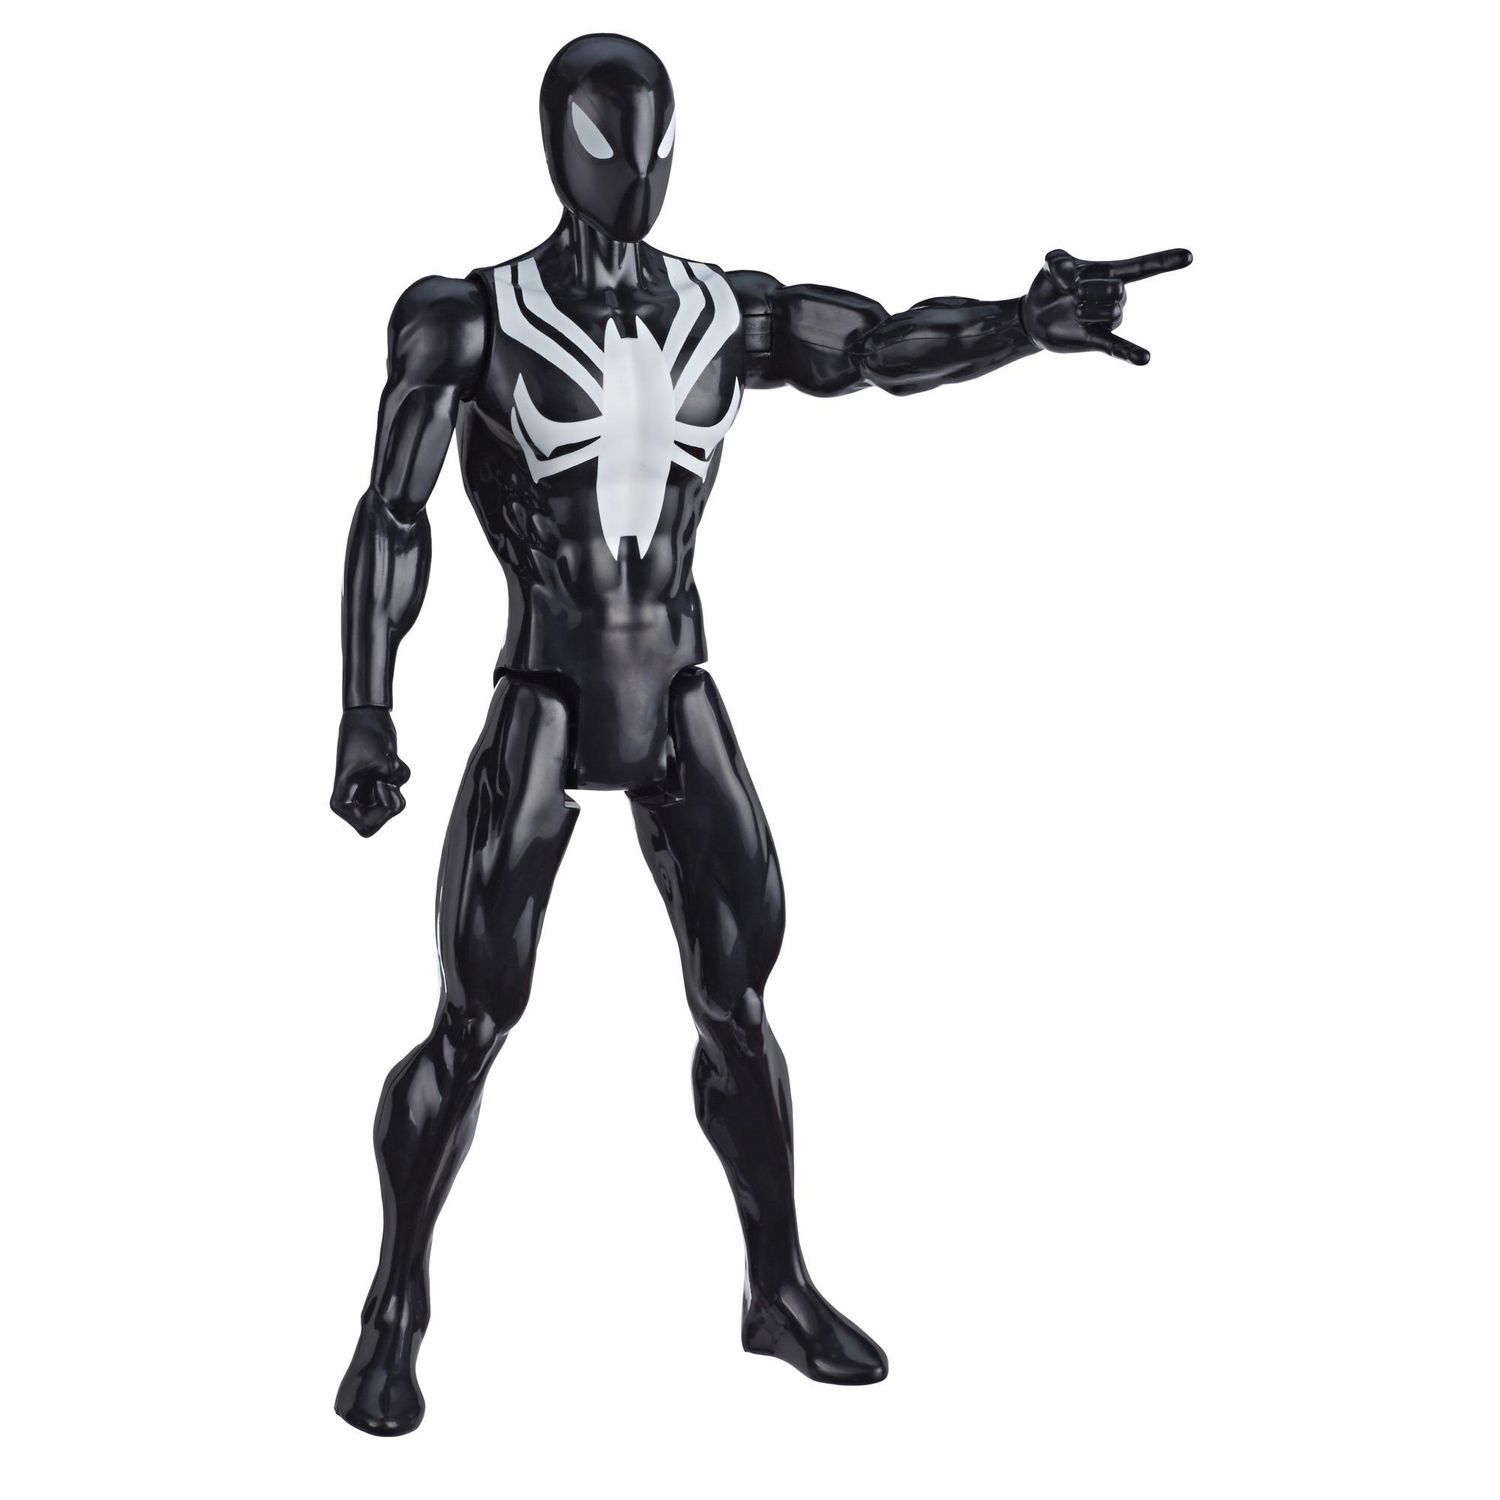 Marvel Spider-Man: Titan Hero Series Villains Black Suit Spider-Man  12-Inch-Scale Super Hero Action Figure Toy Great Kids For Ages 4 And Up 